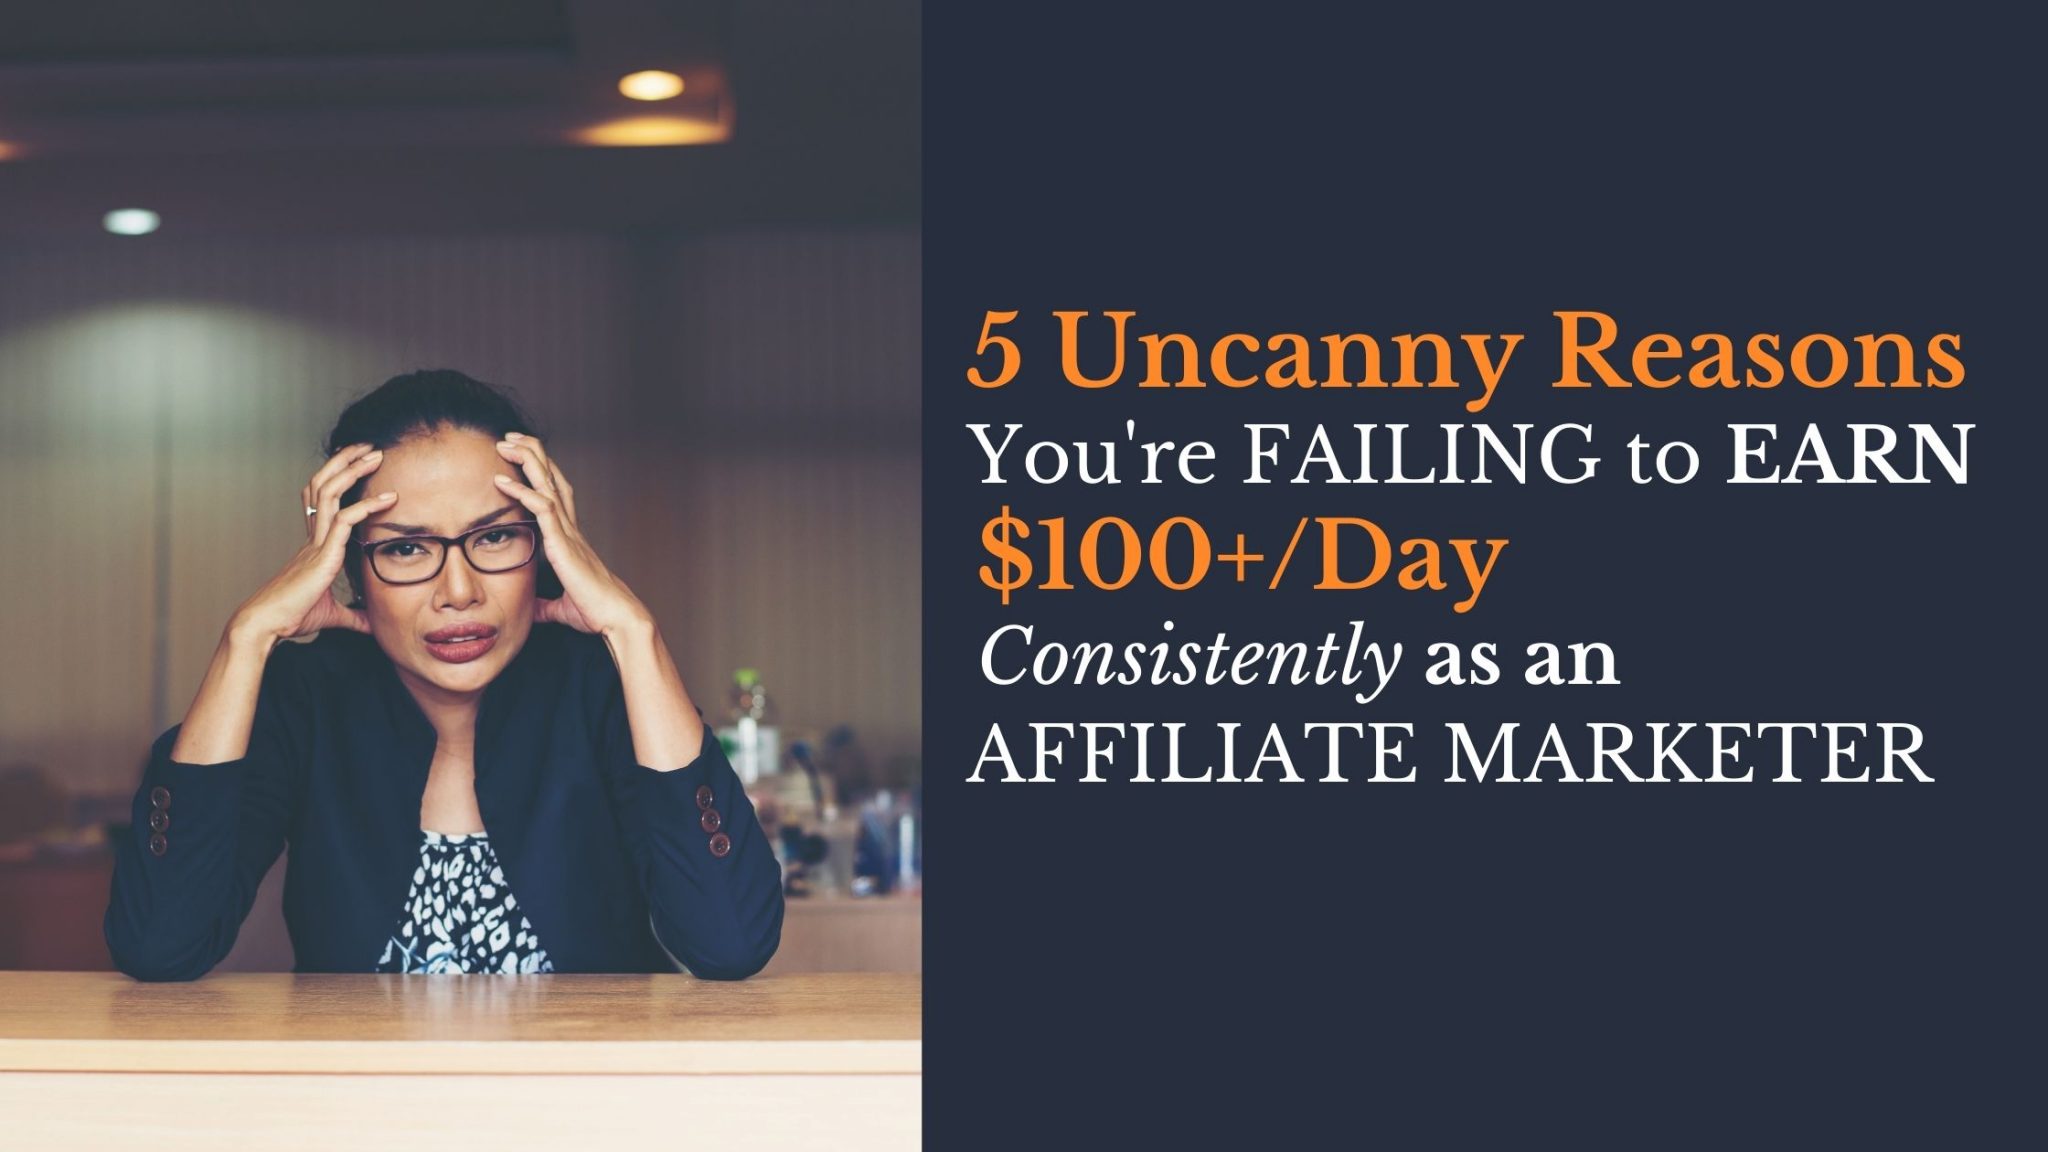 5 Uncanny Reasons You’re Failing to Earn $100 or More Per Day (consistently) As An Affiliate Marketer